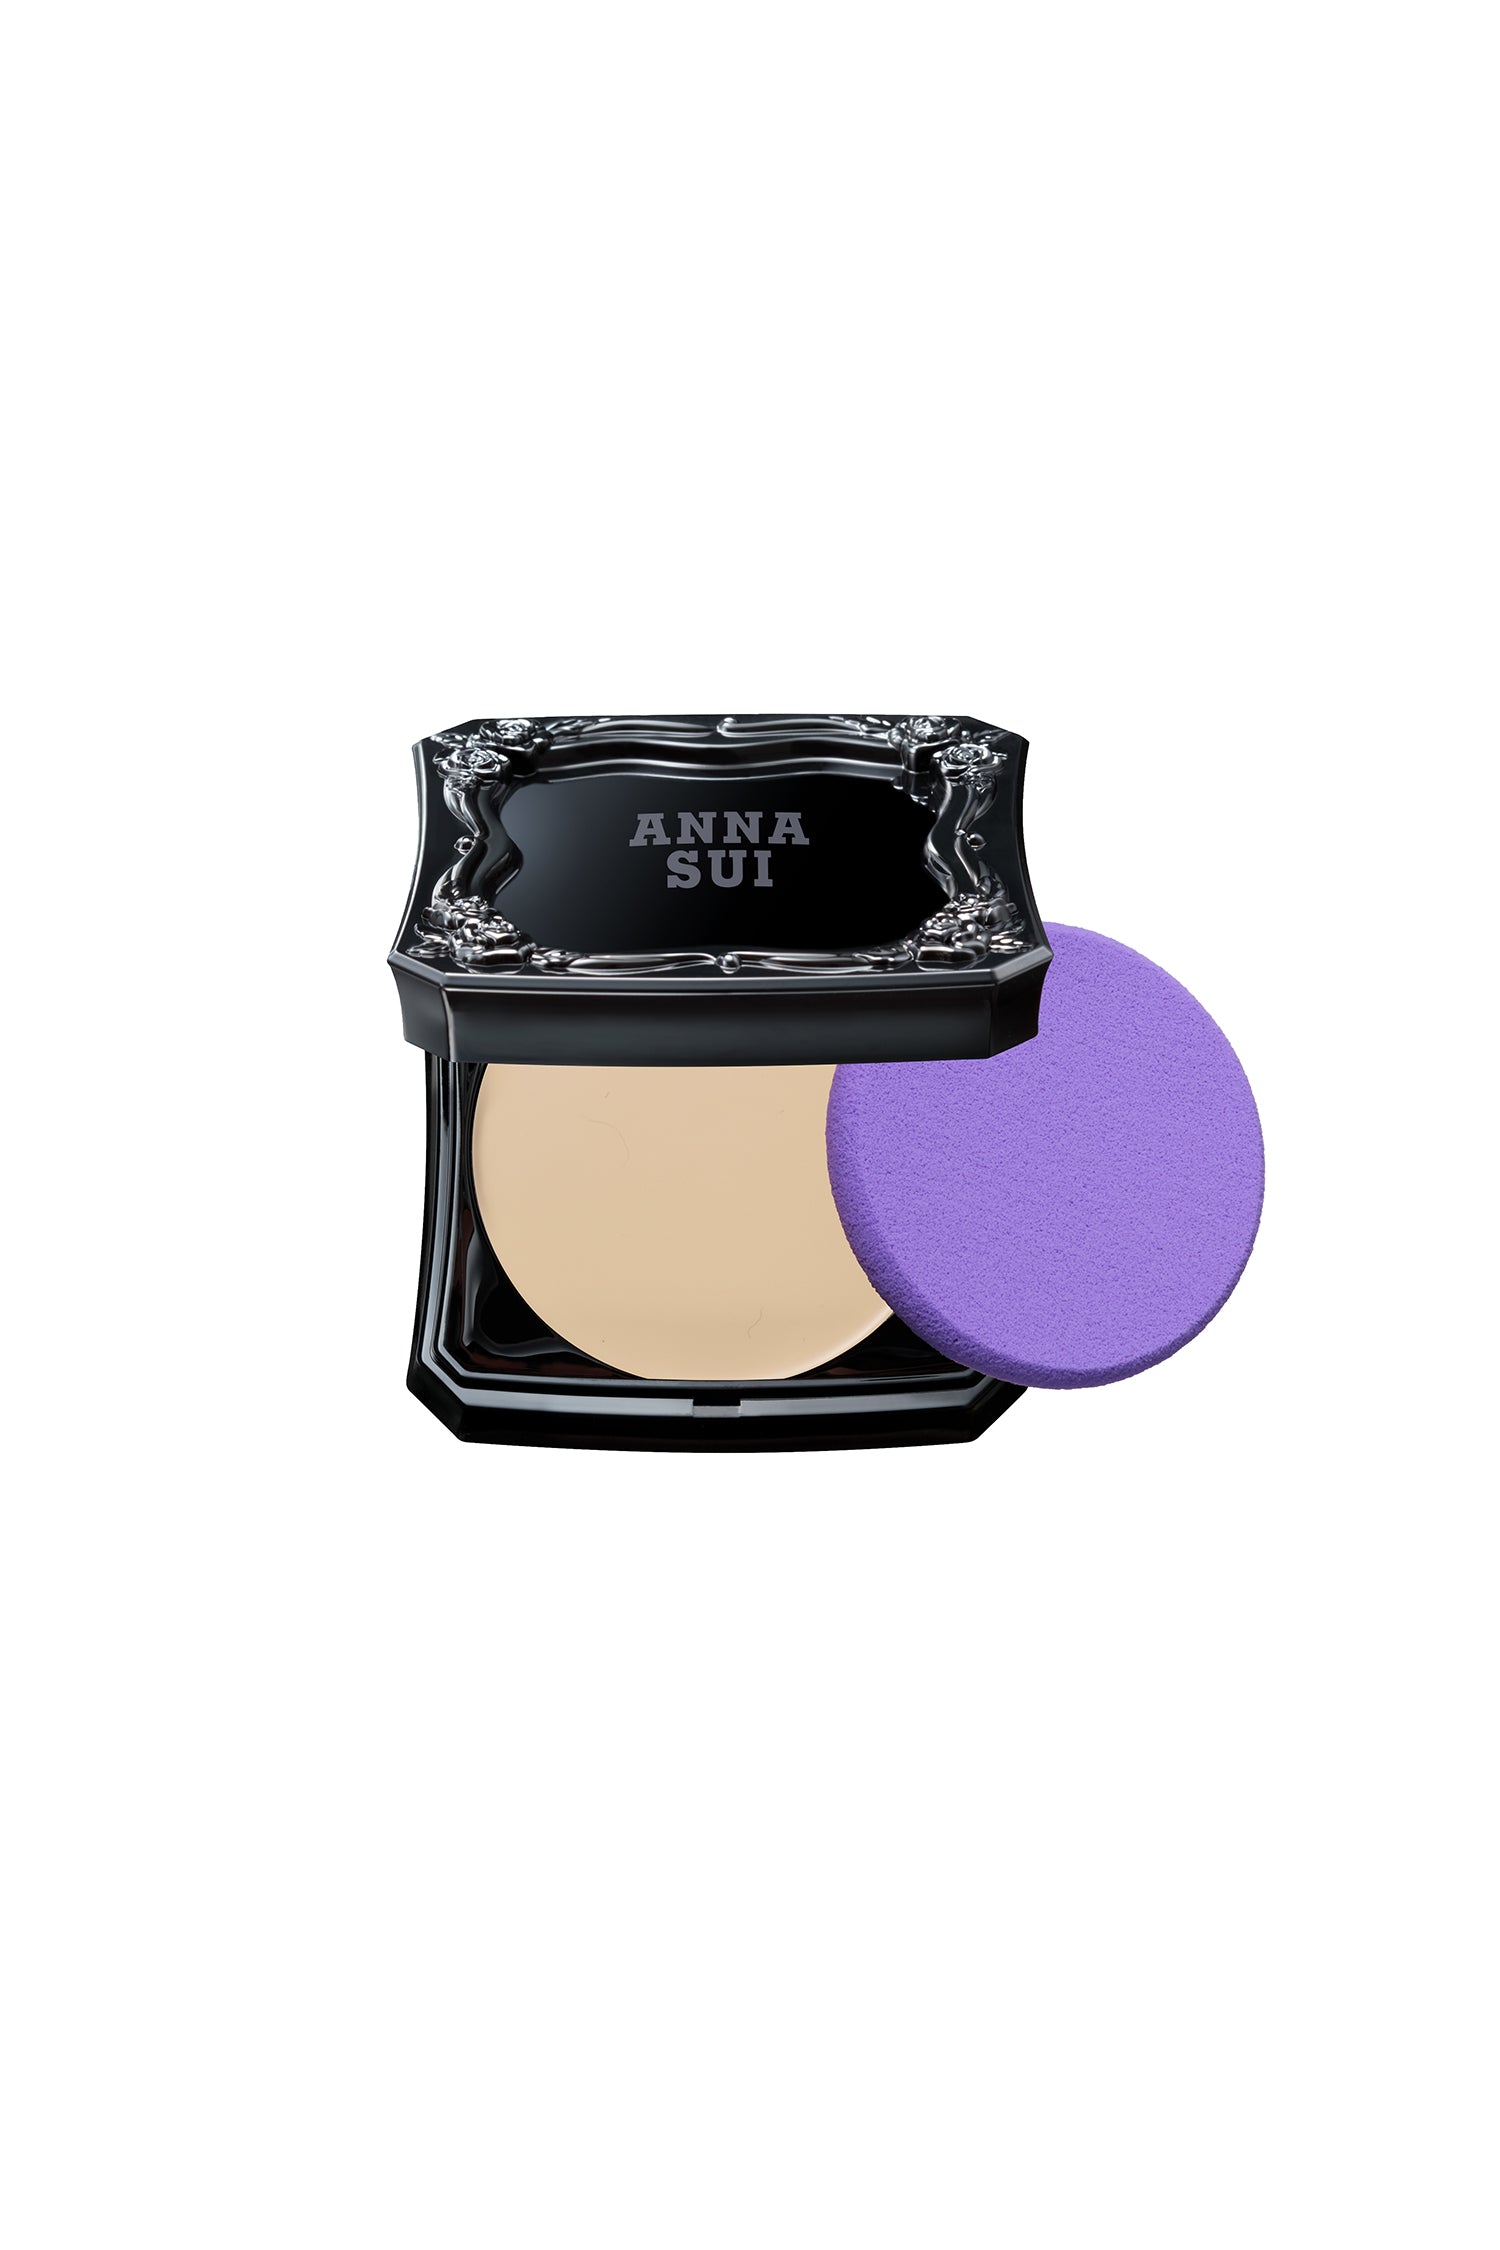 FAIR foundation in a black squared container with raised rose pattern and Anna Sui label